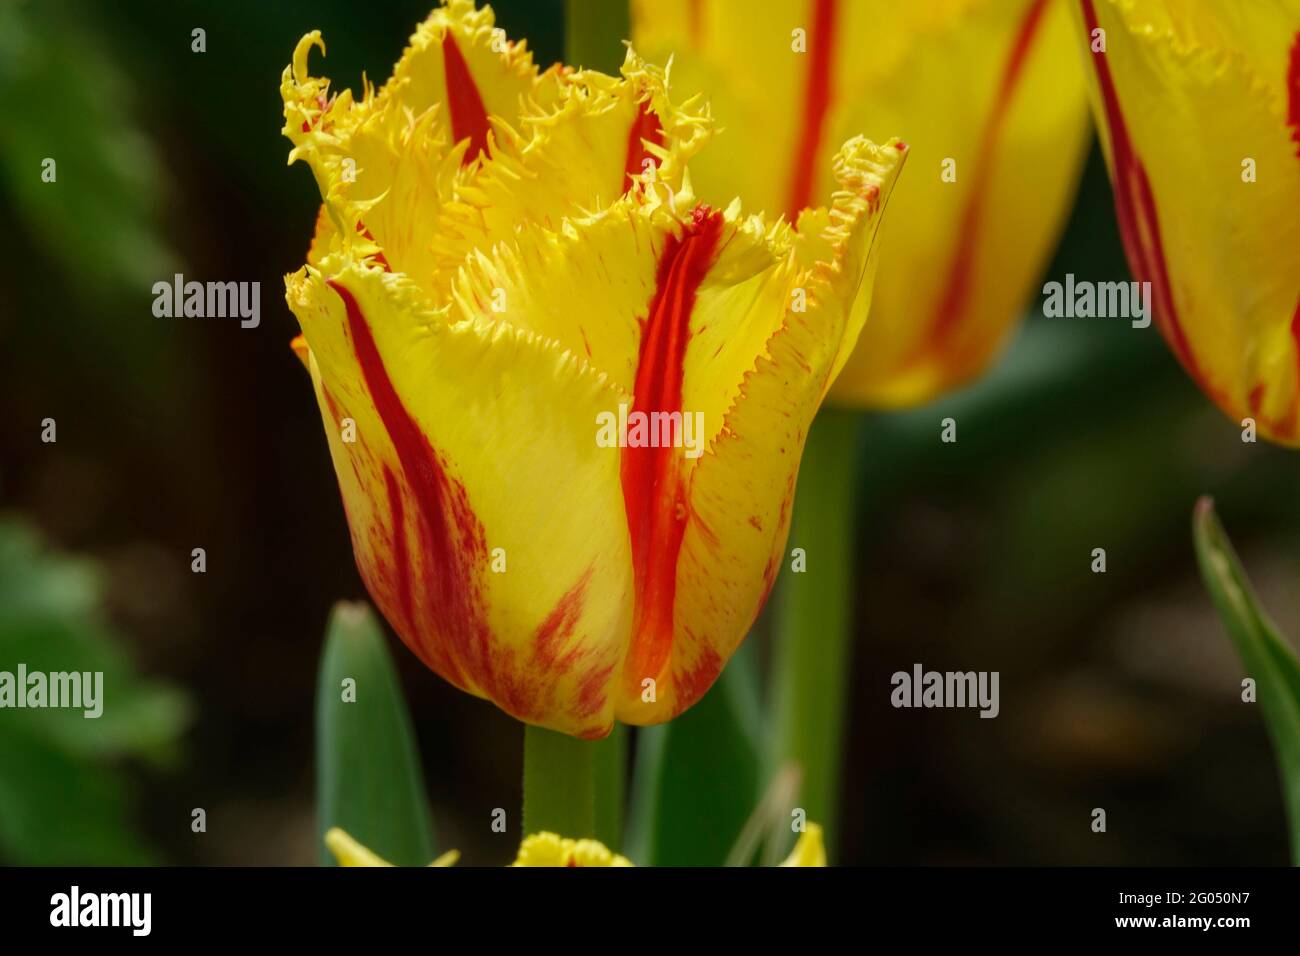 Yellow Fringed Party Clown Tulips with Red Stripes along the Pointed Ruffled Petals Stock Photo